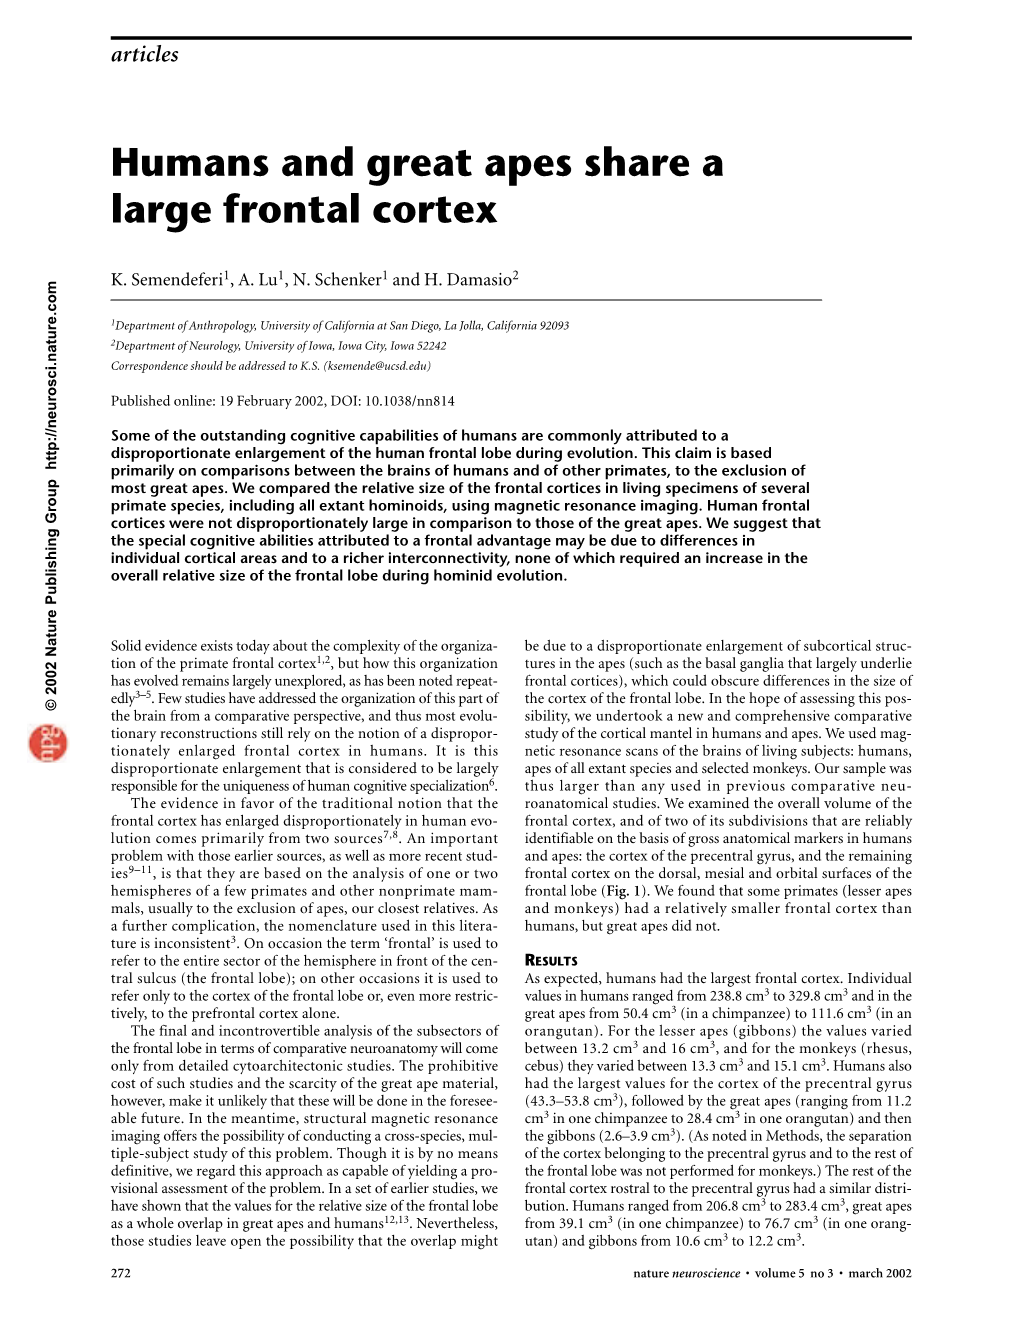 Humans and Great Apes Share a Large Frontal Cortex